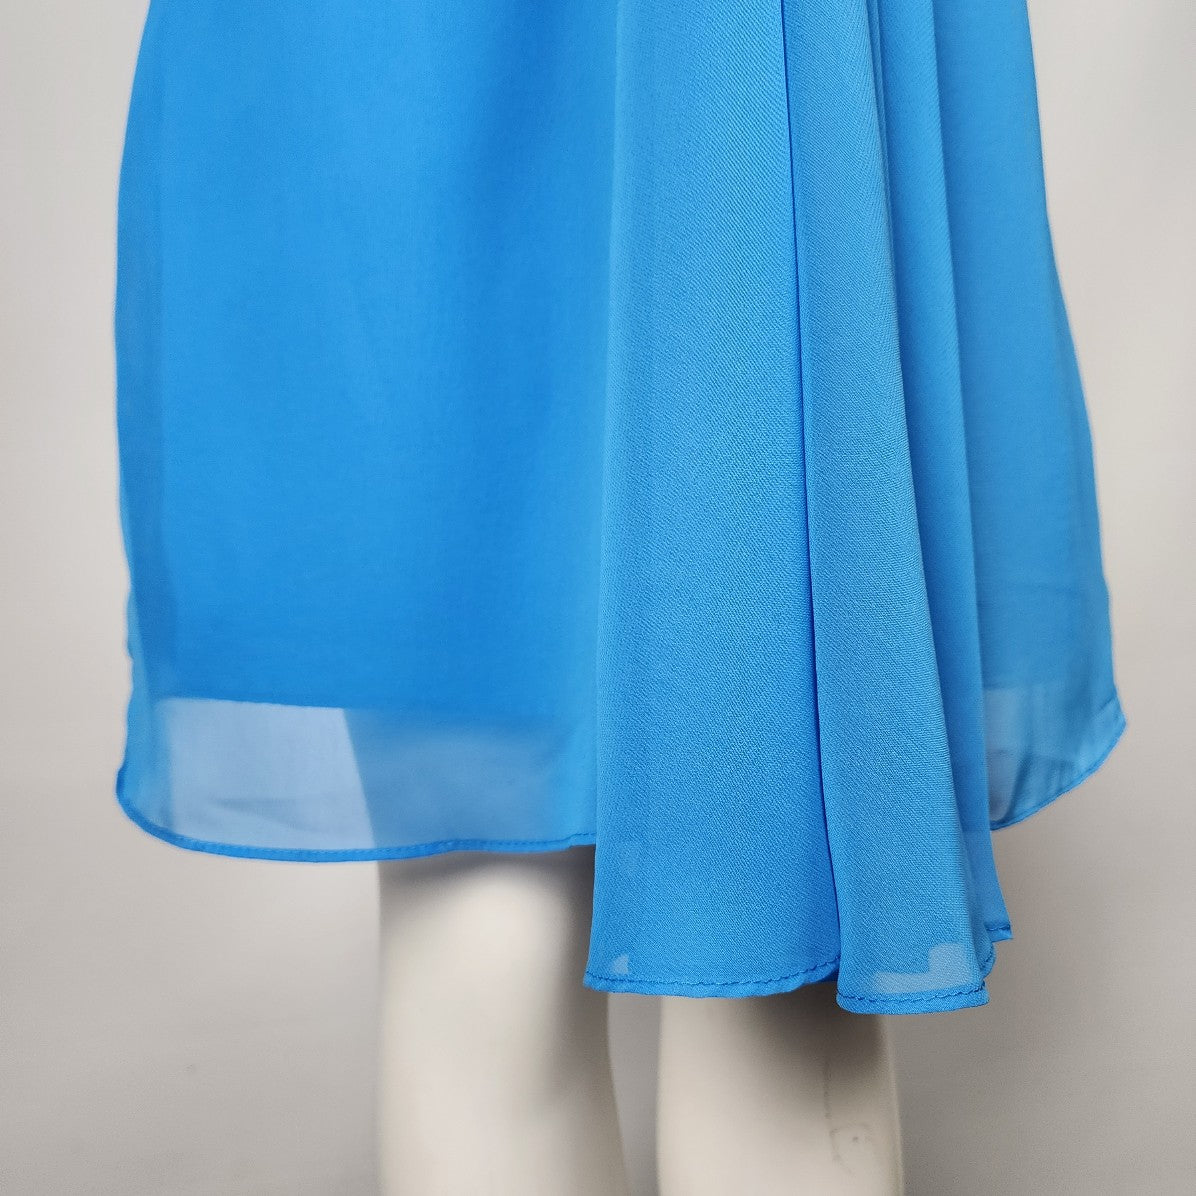 Alfred Angelo Blue Ribbon Bridesmaid Event Dress Size S